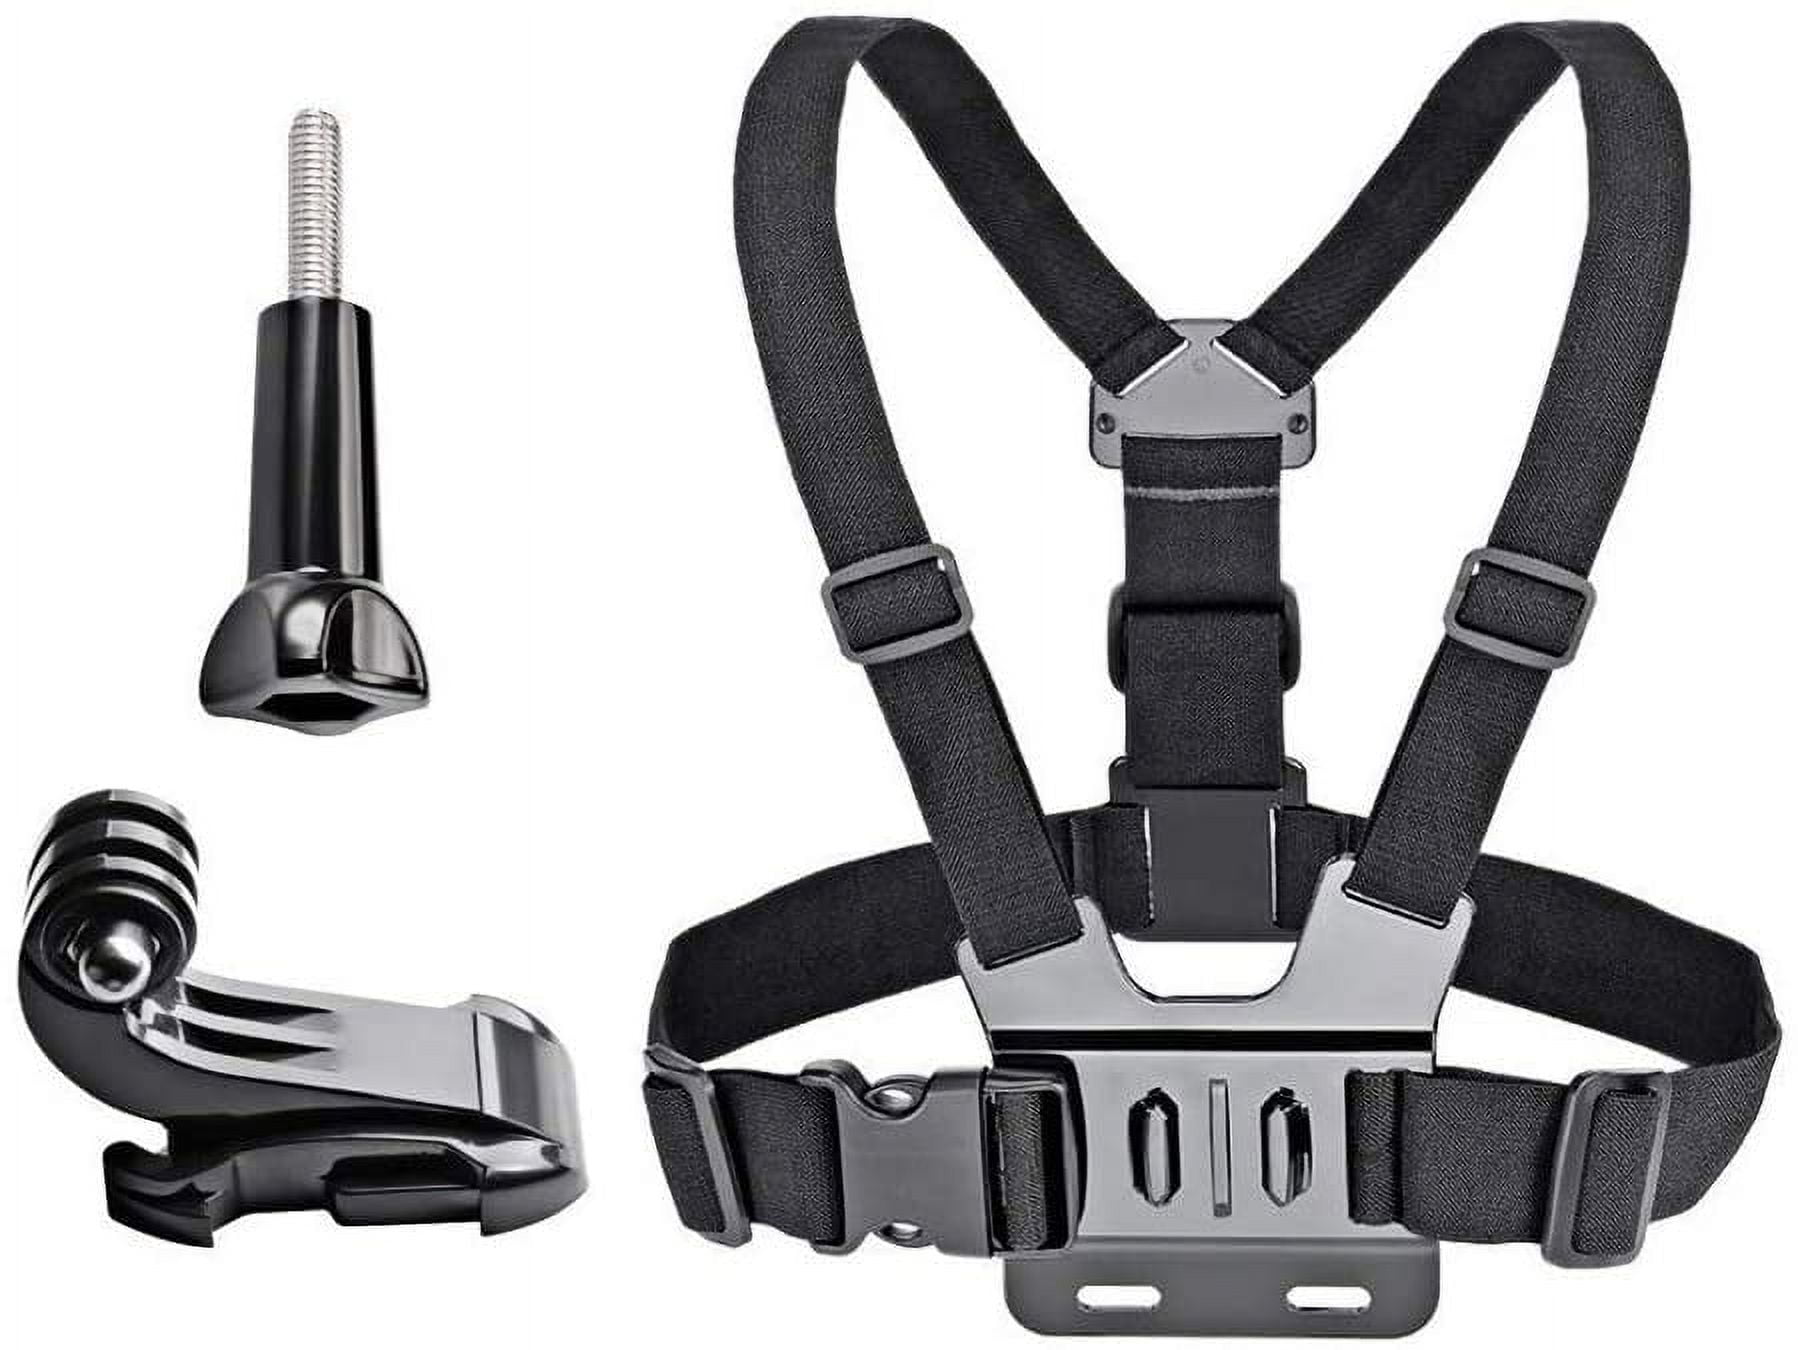 Action Camera Chest Mount Strap Harness Compatible with Gopro Hero 9/8/7/6/5  Session/AKASO EK7000 Brave 4 5 6 Plus/APEMAN/Dragon Touch 